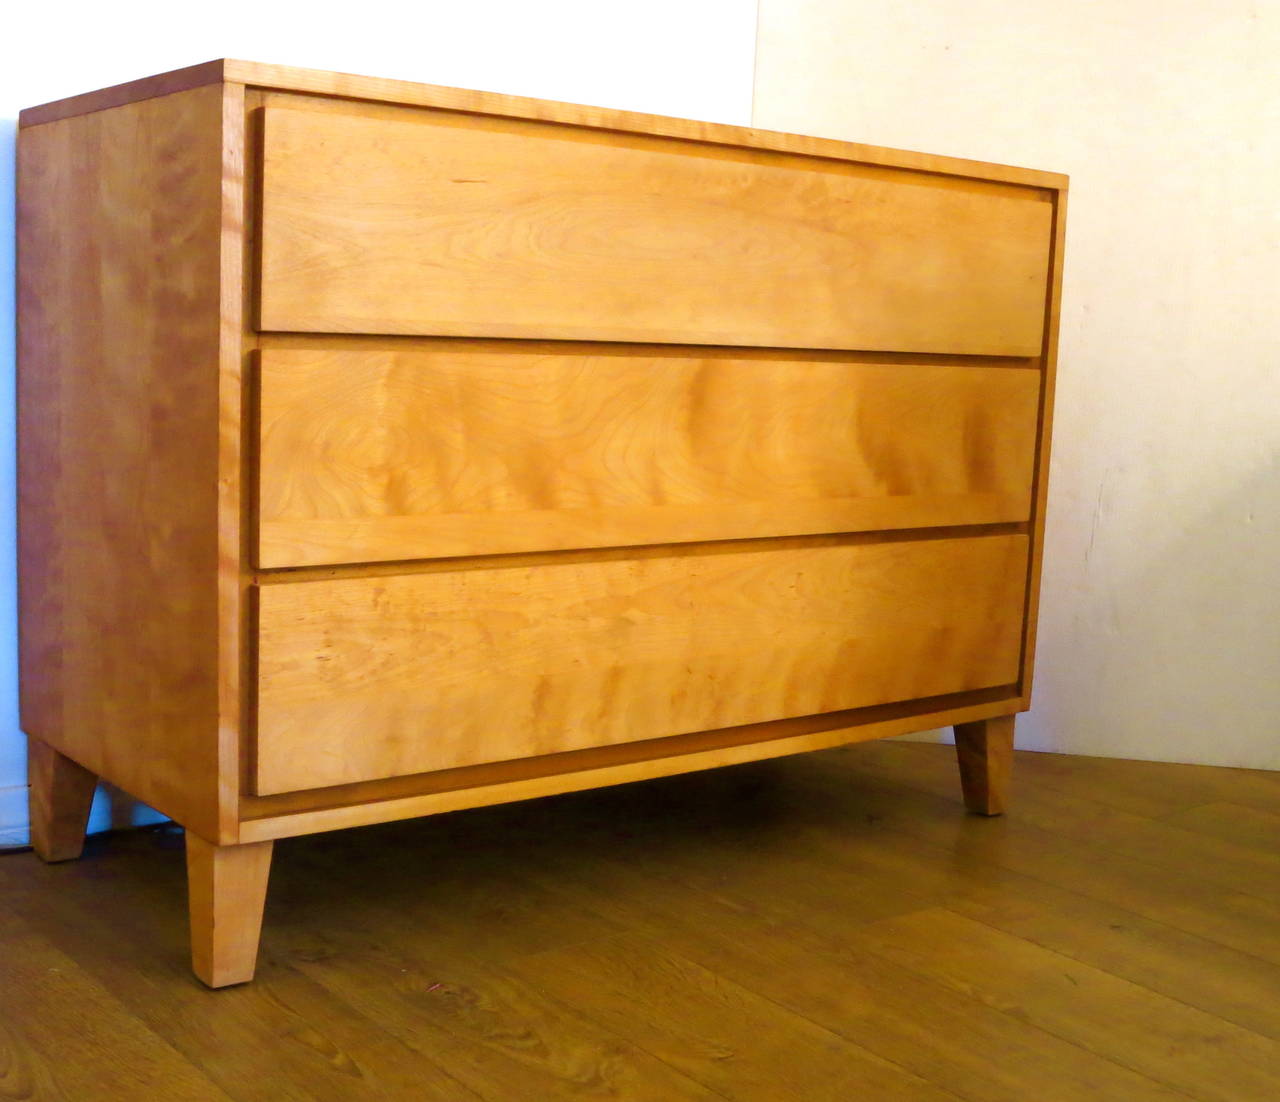 1950s American modern solid wood maple dresser, designed by Russel Wright for Conant Ball, in great condition freshly refinished, nice solid and great quality.